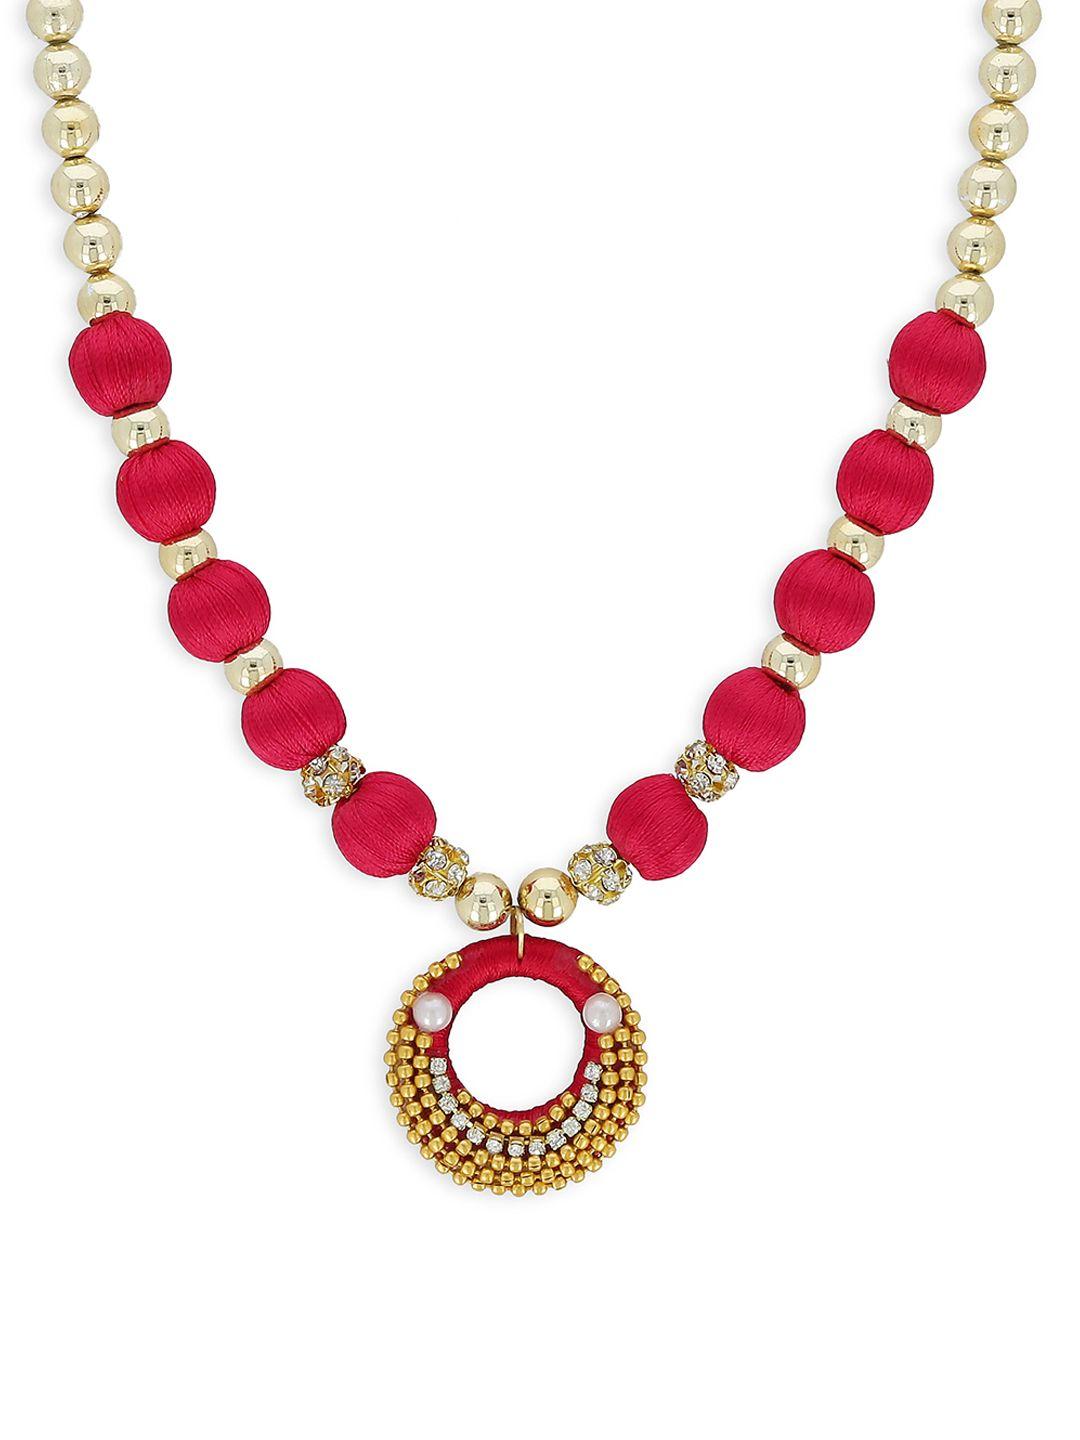 akshara-gold-toned-and-red-handcrafted-beaded-necklace